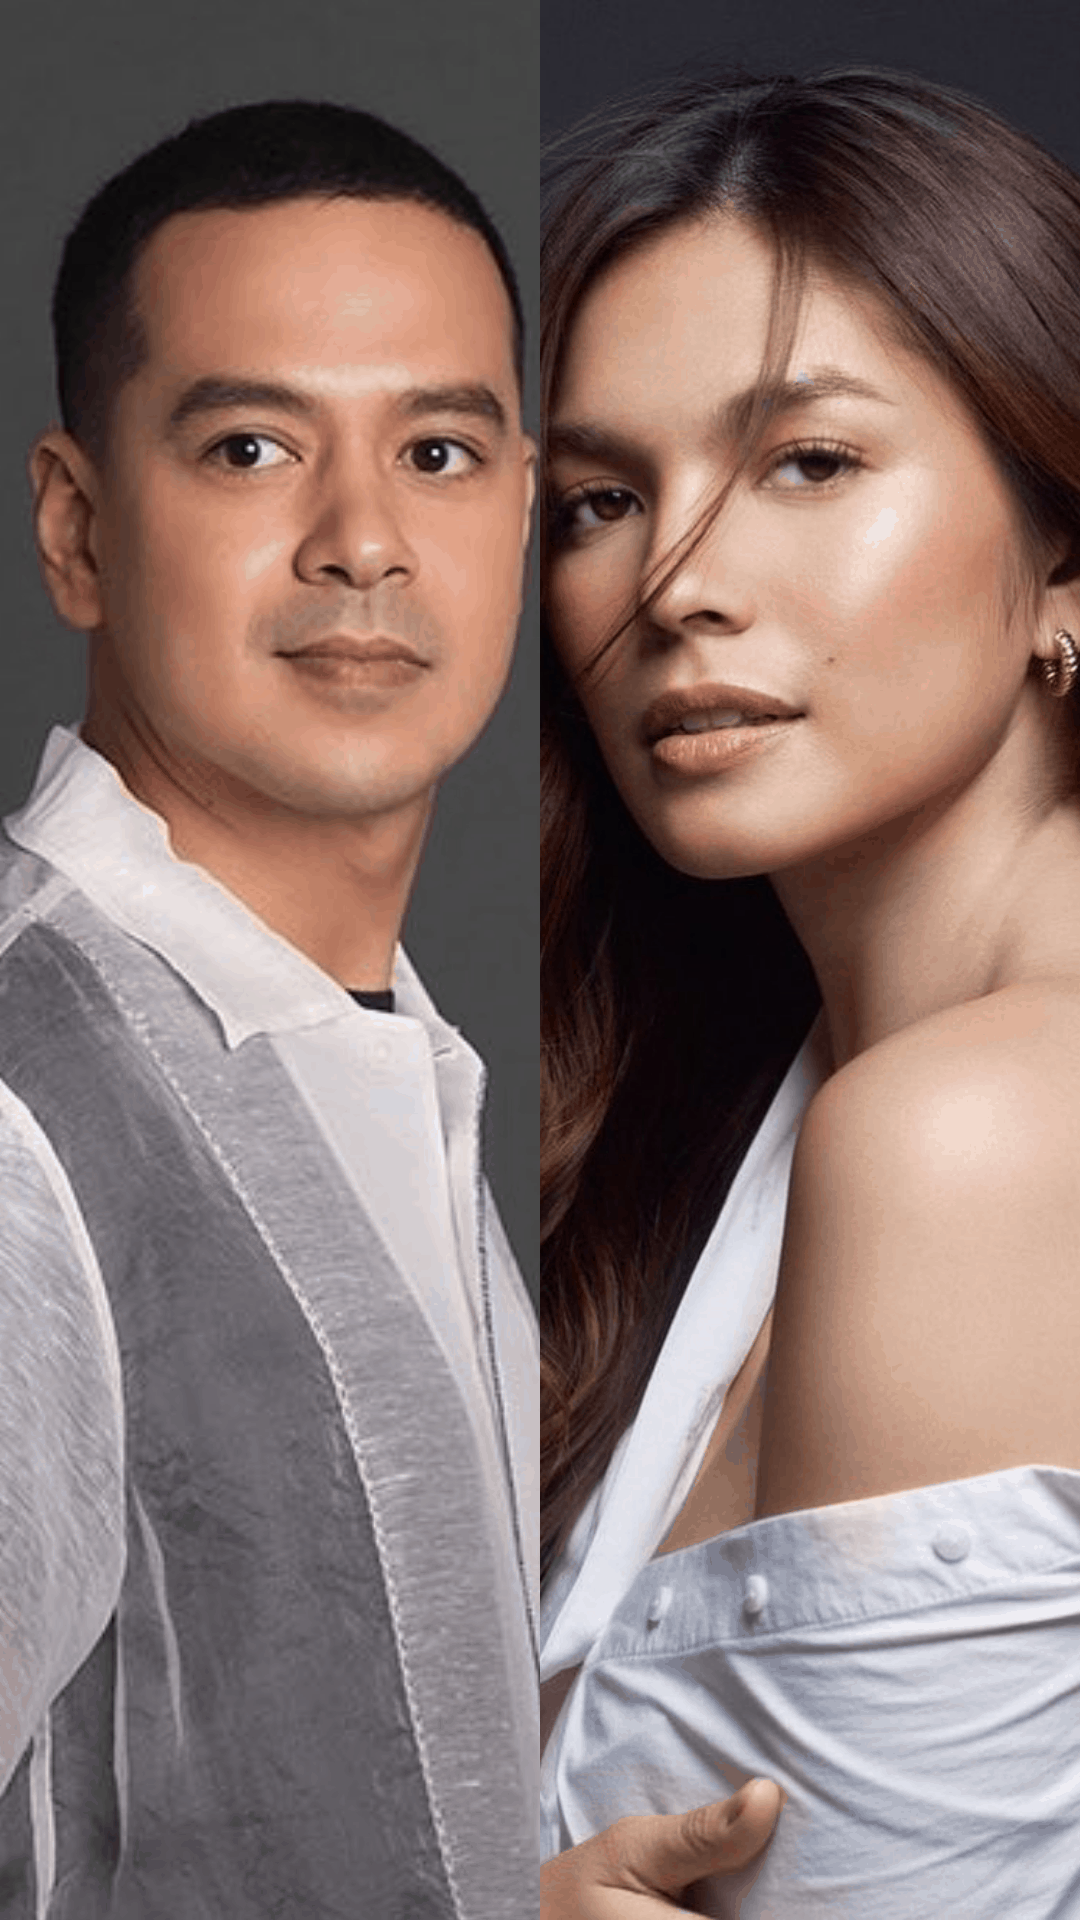 Andrea Torres says it will be a 'big honor' to work with John Lloyd